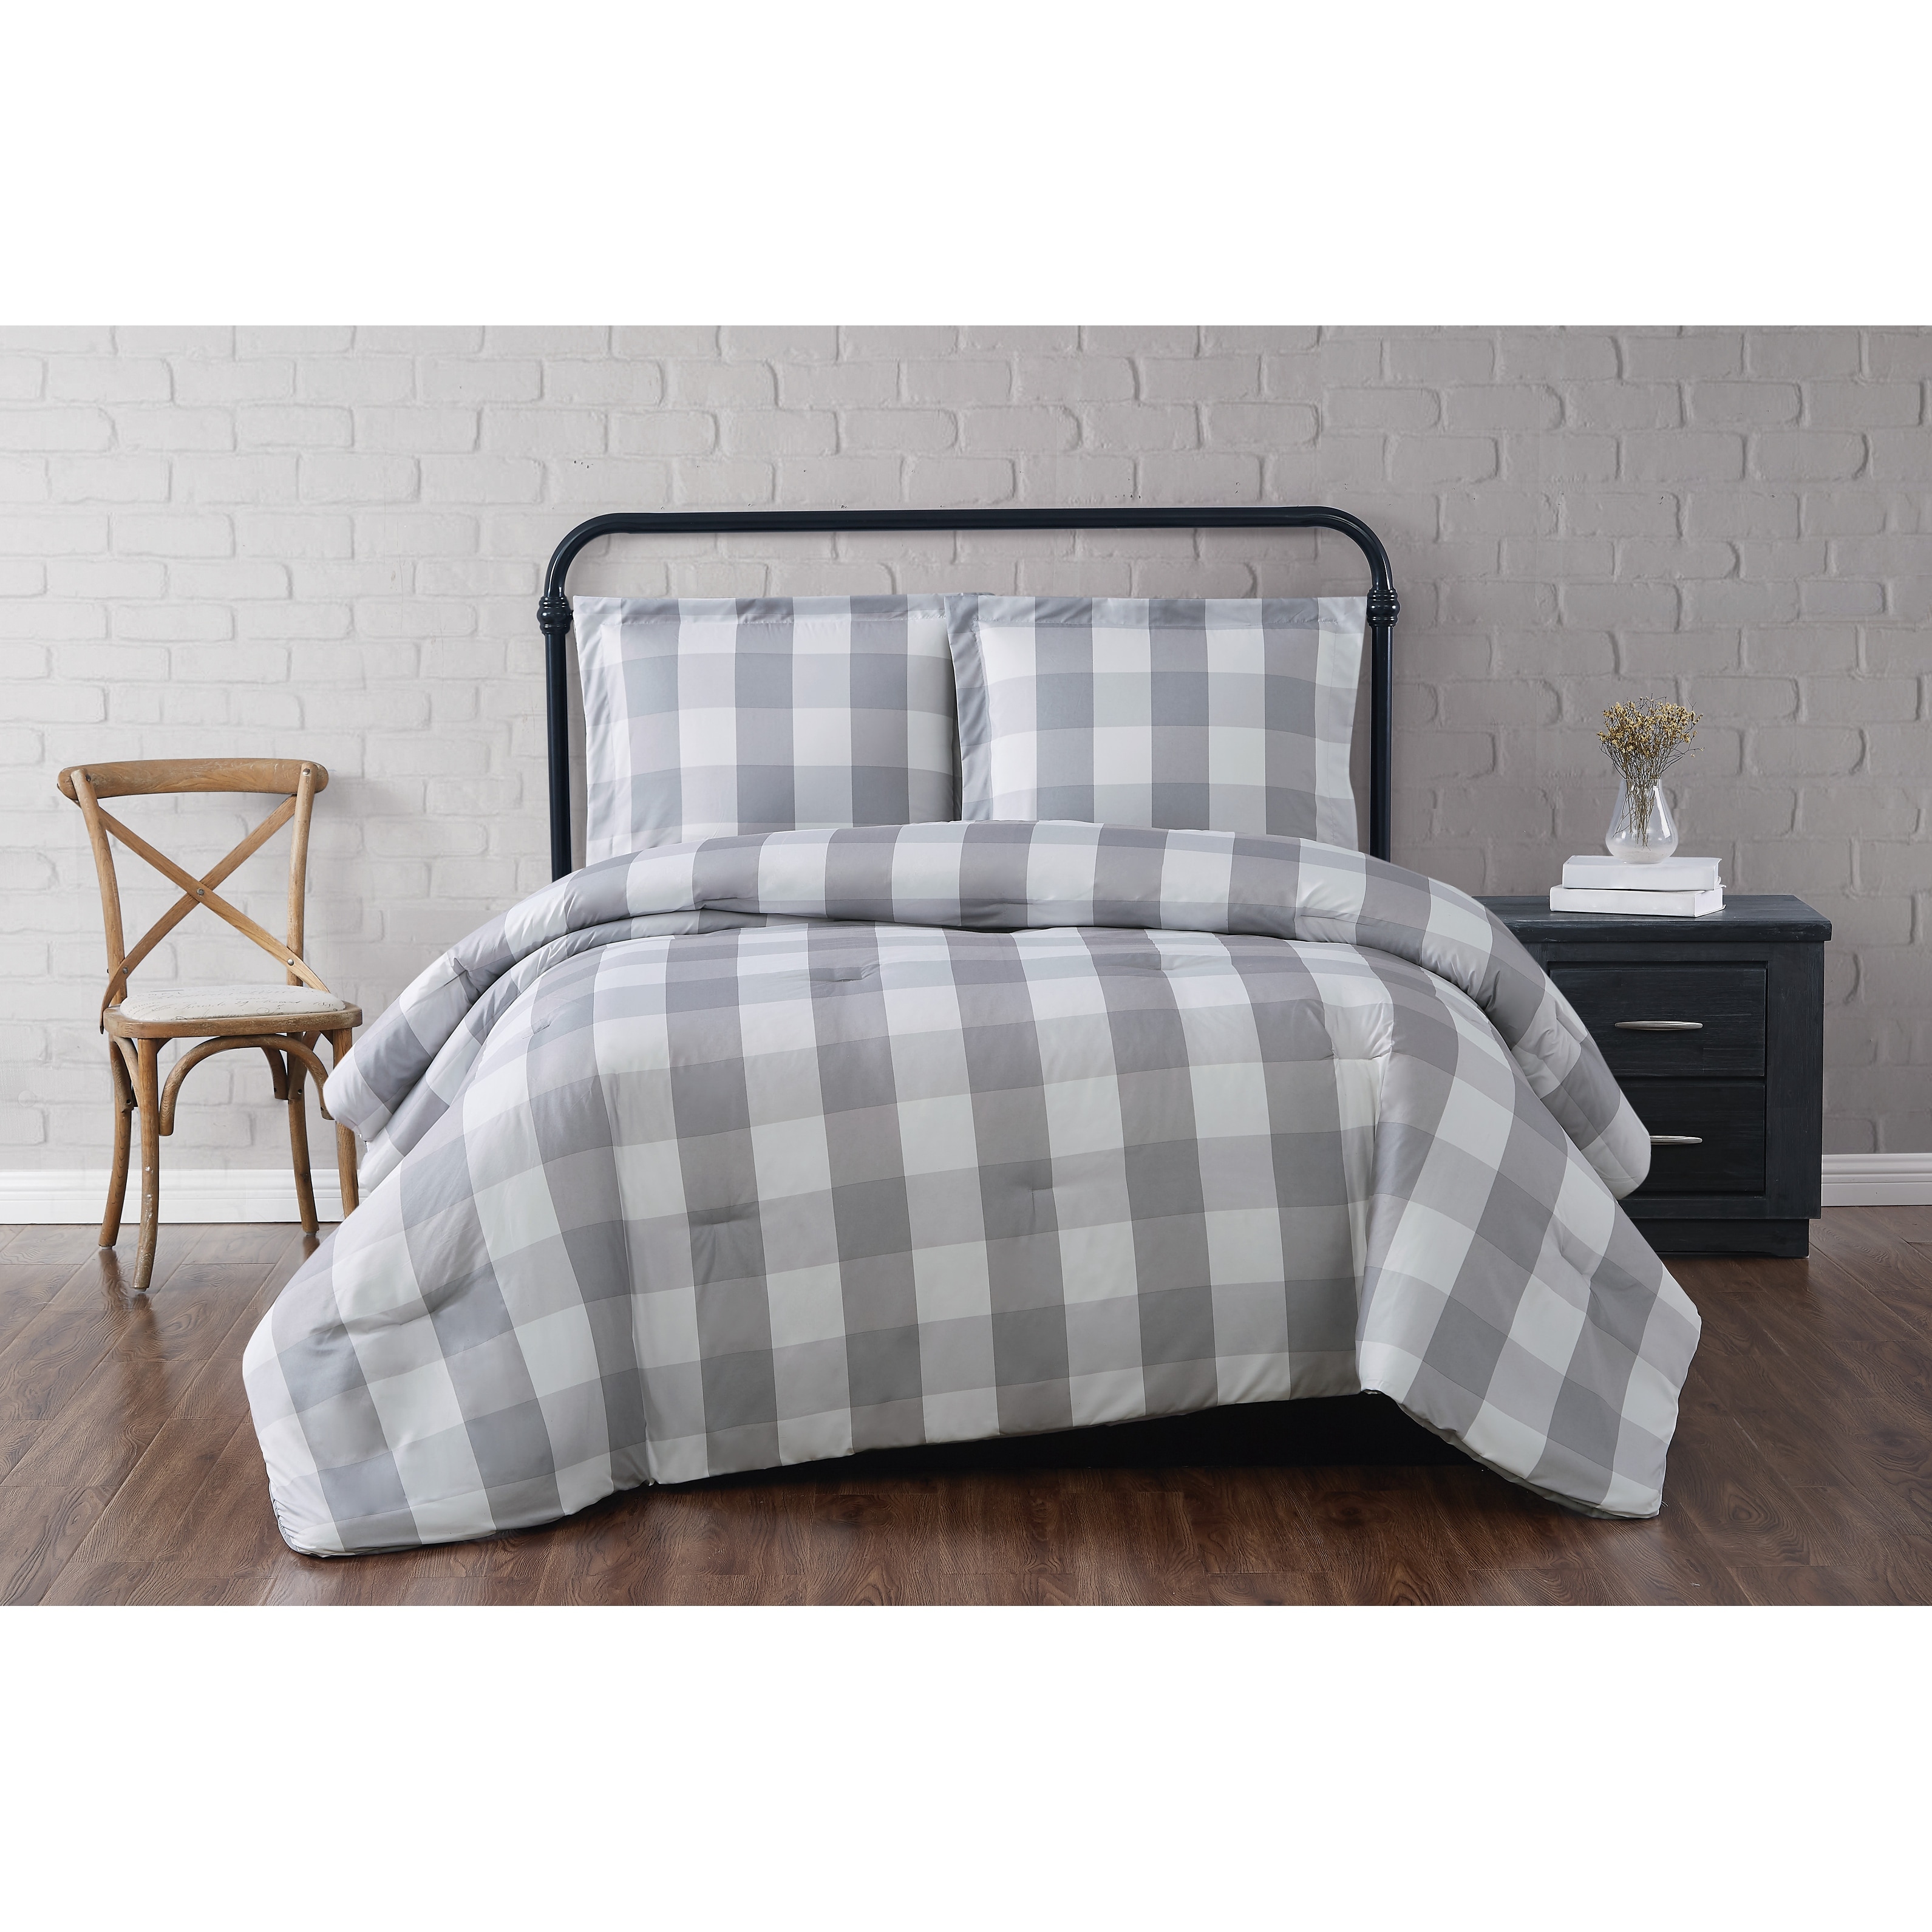 Details about   Black White Buffalo Plaid Large Checked 2 pc Comforter Set Twin Size Bedding 